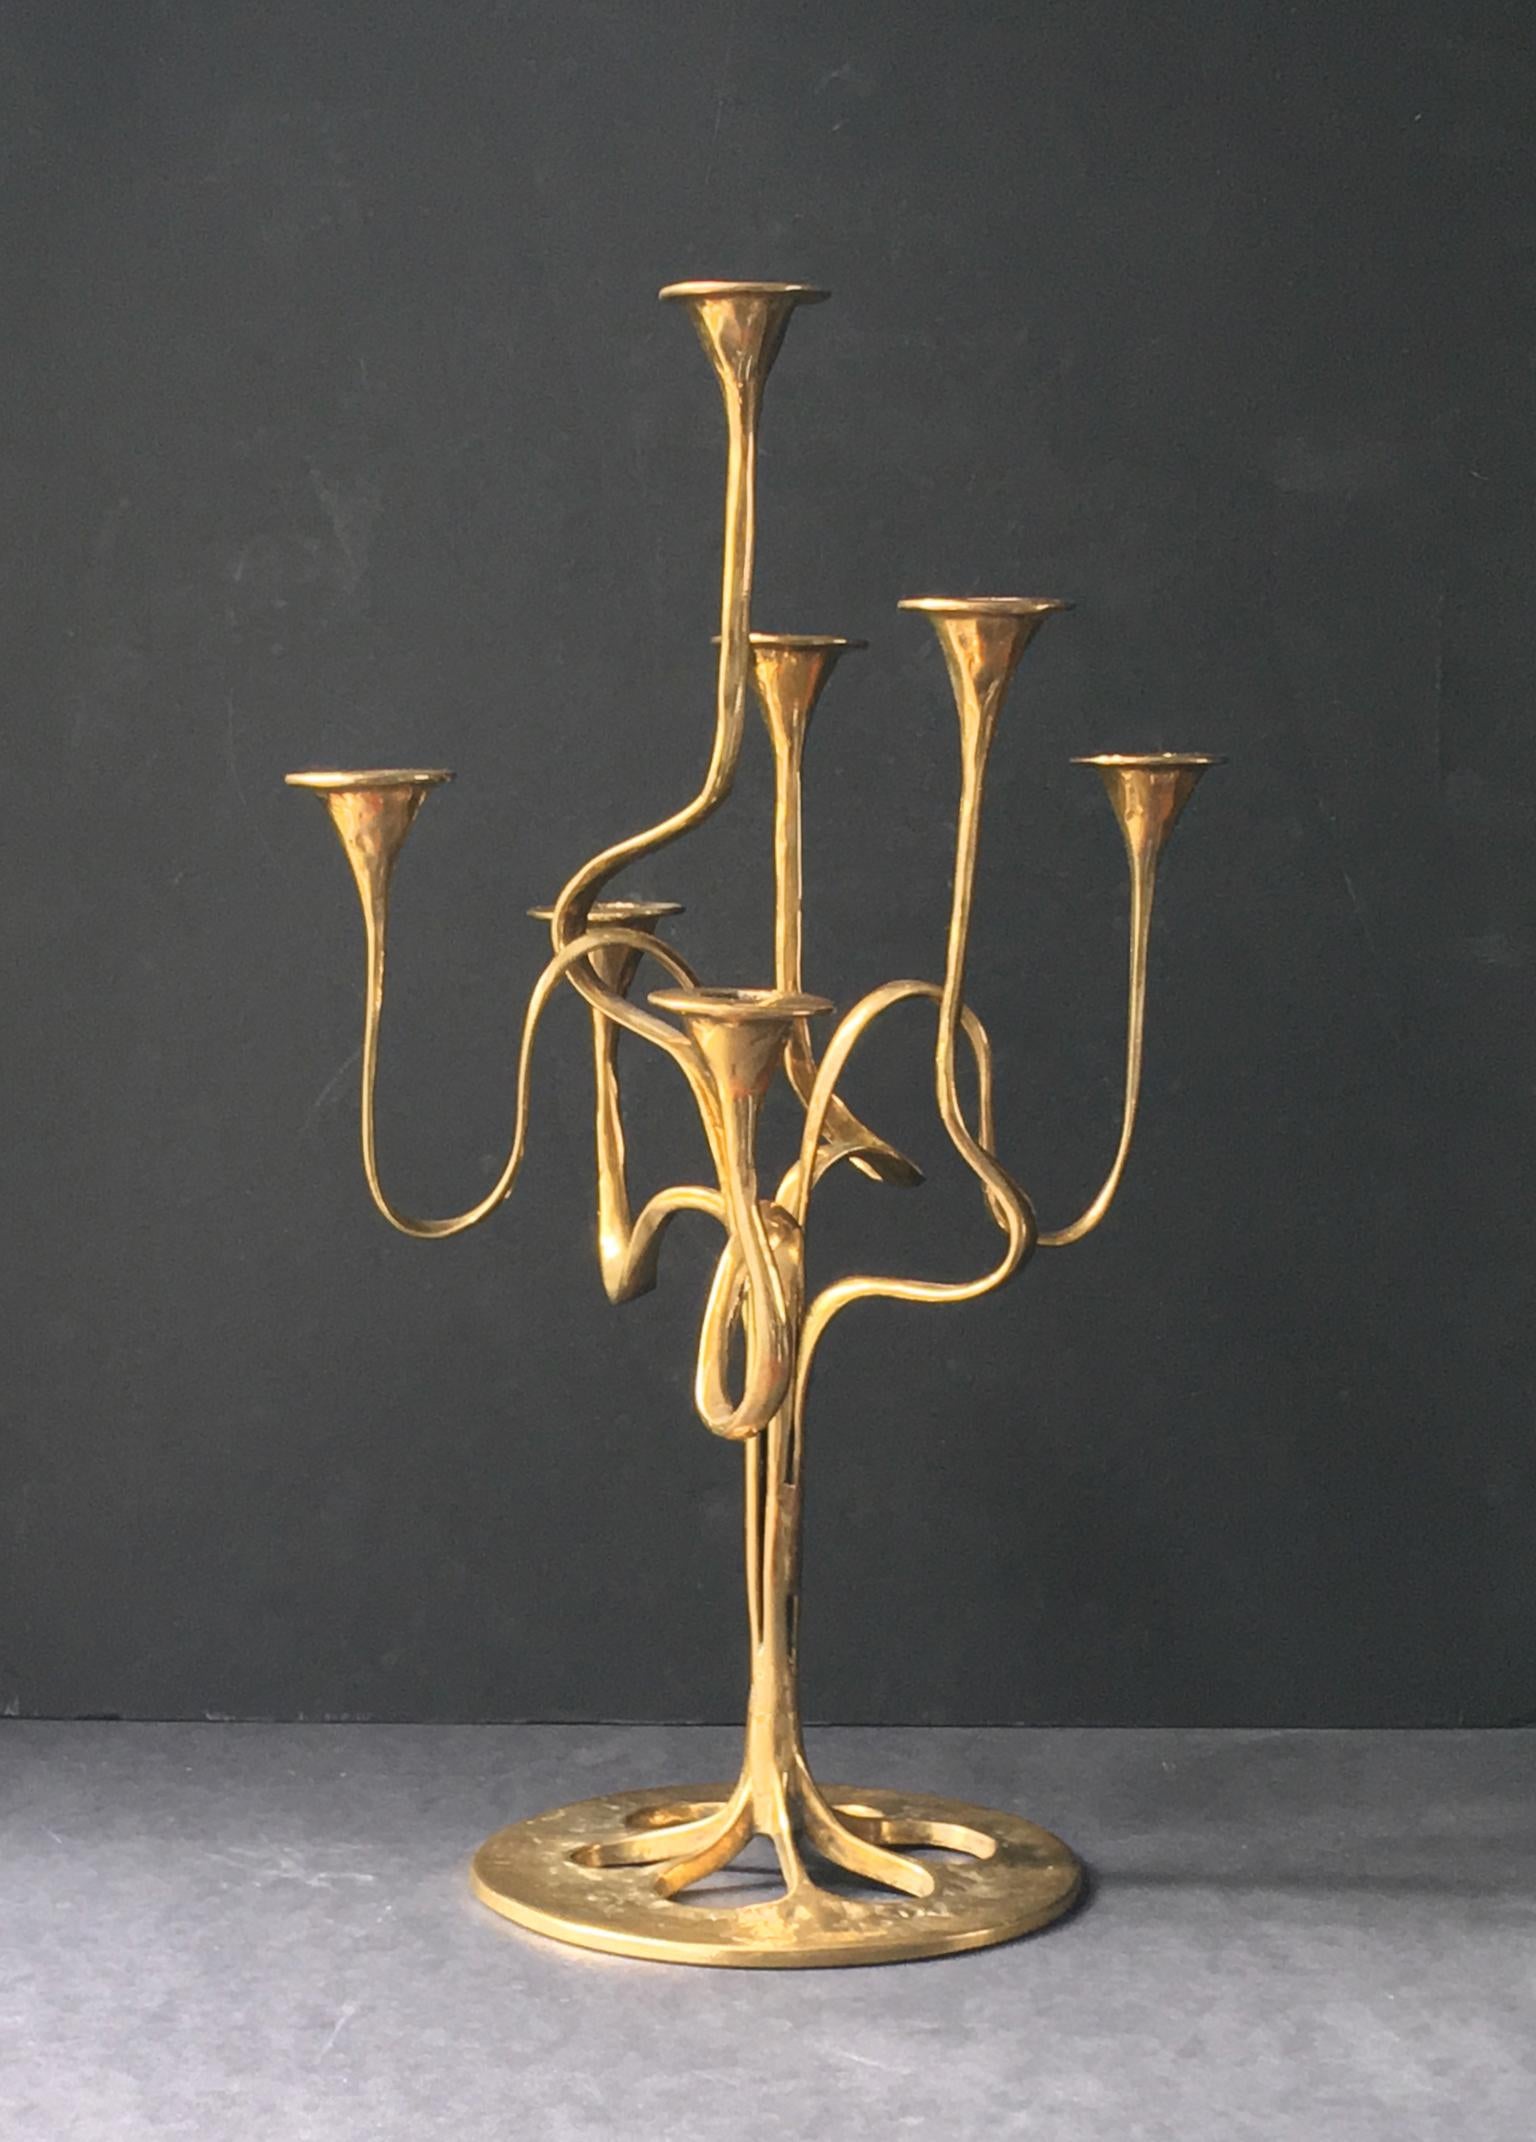 *** Summer sale: special prices on selected pieces until 31 August ***

Candlestick or candelabra with seven arms of organic, ribbon form, evoking Art Nouveau style. 

The piece is composed of polished brass and is in good original condition with